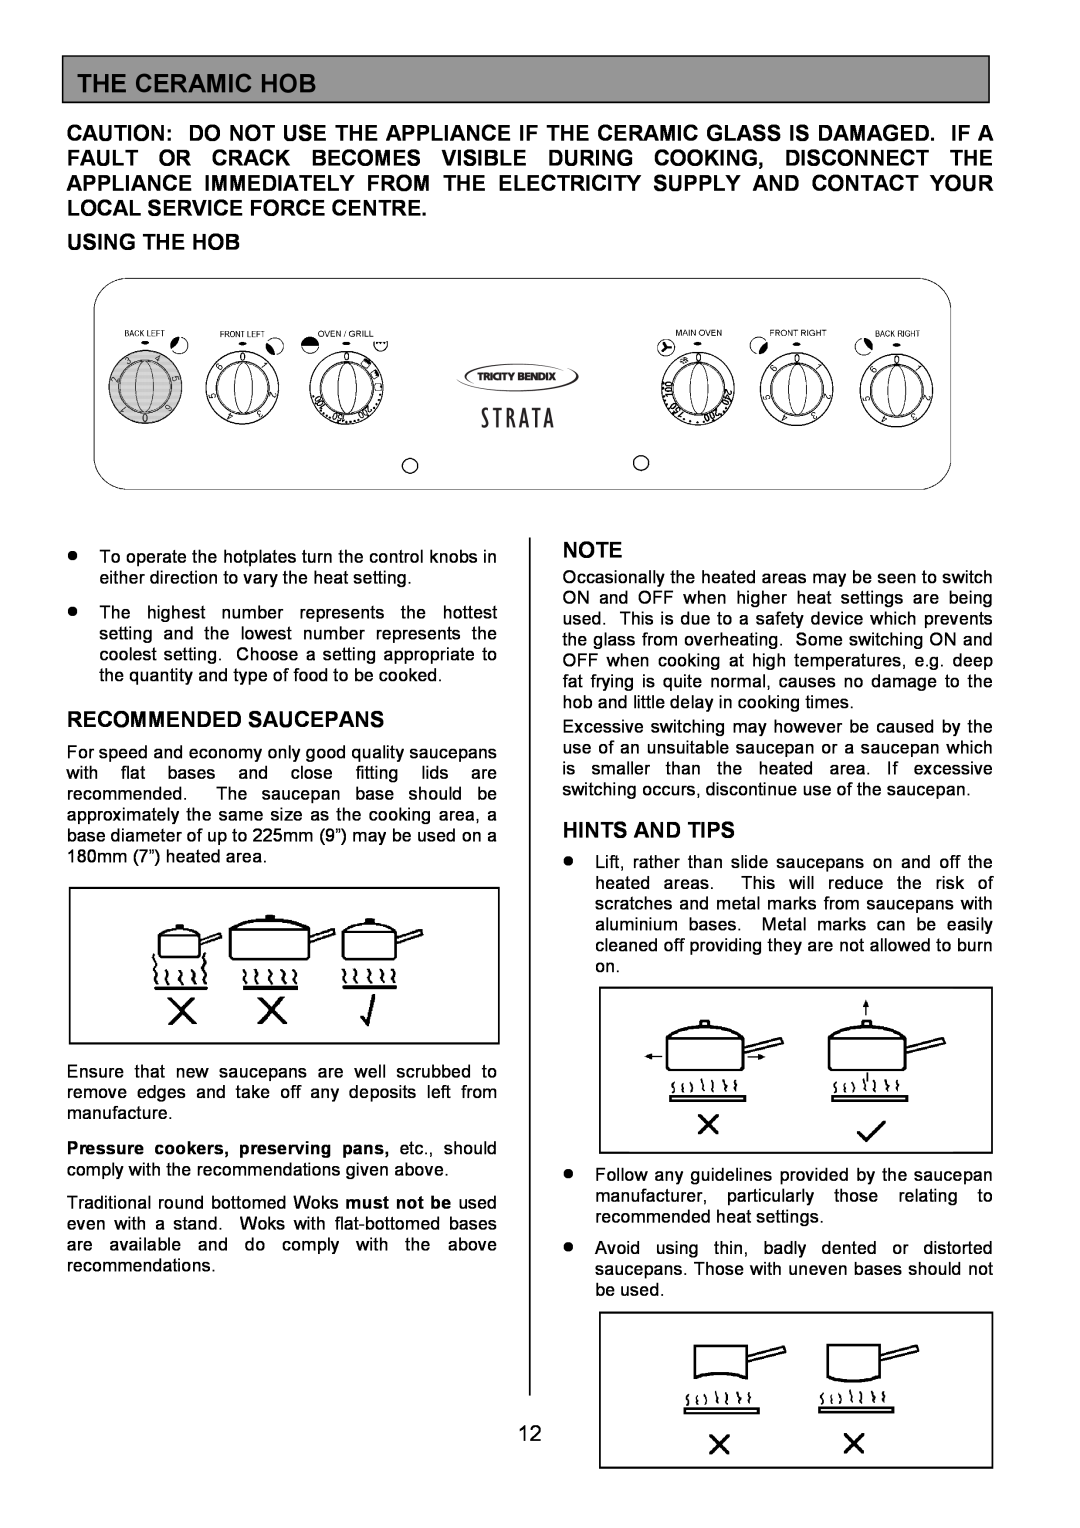 Tricity Bendix CSE500 installation instructions The Ceramic Hob, Using The Hob, Recommended Saucepans, Hints And Tips 